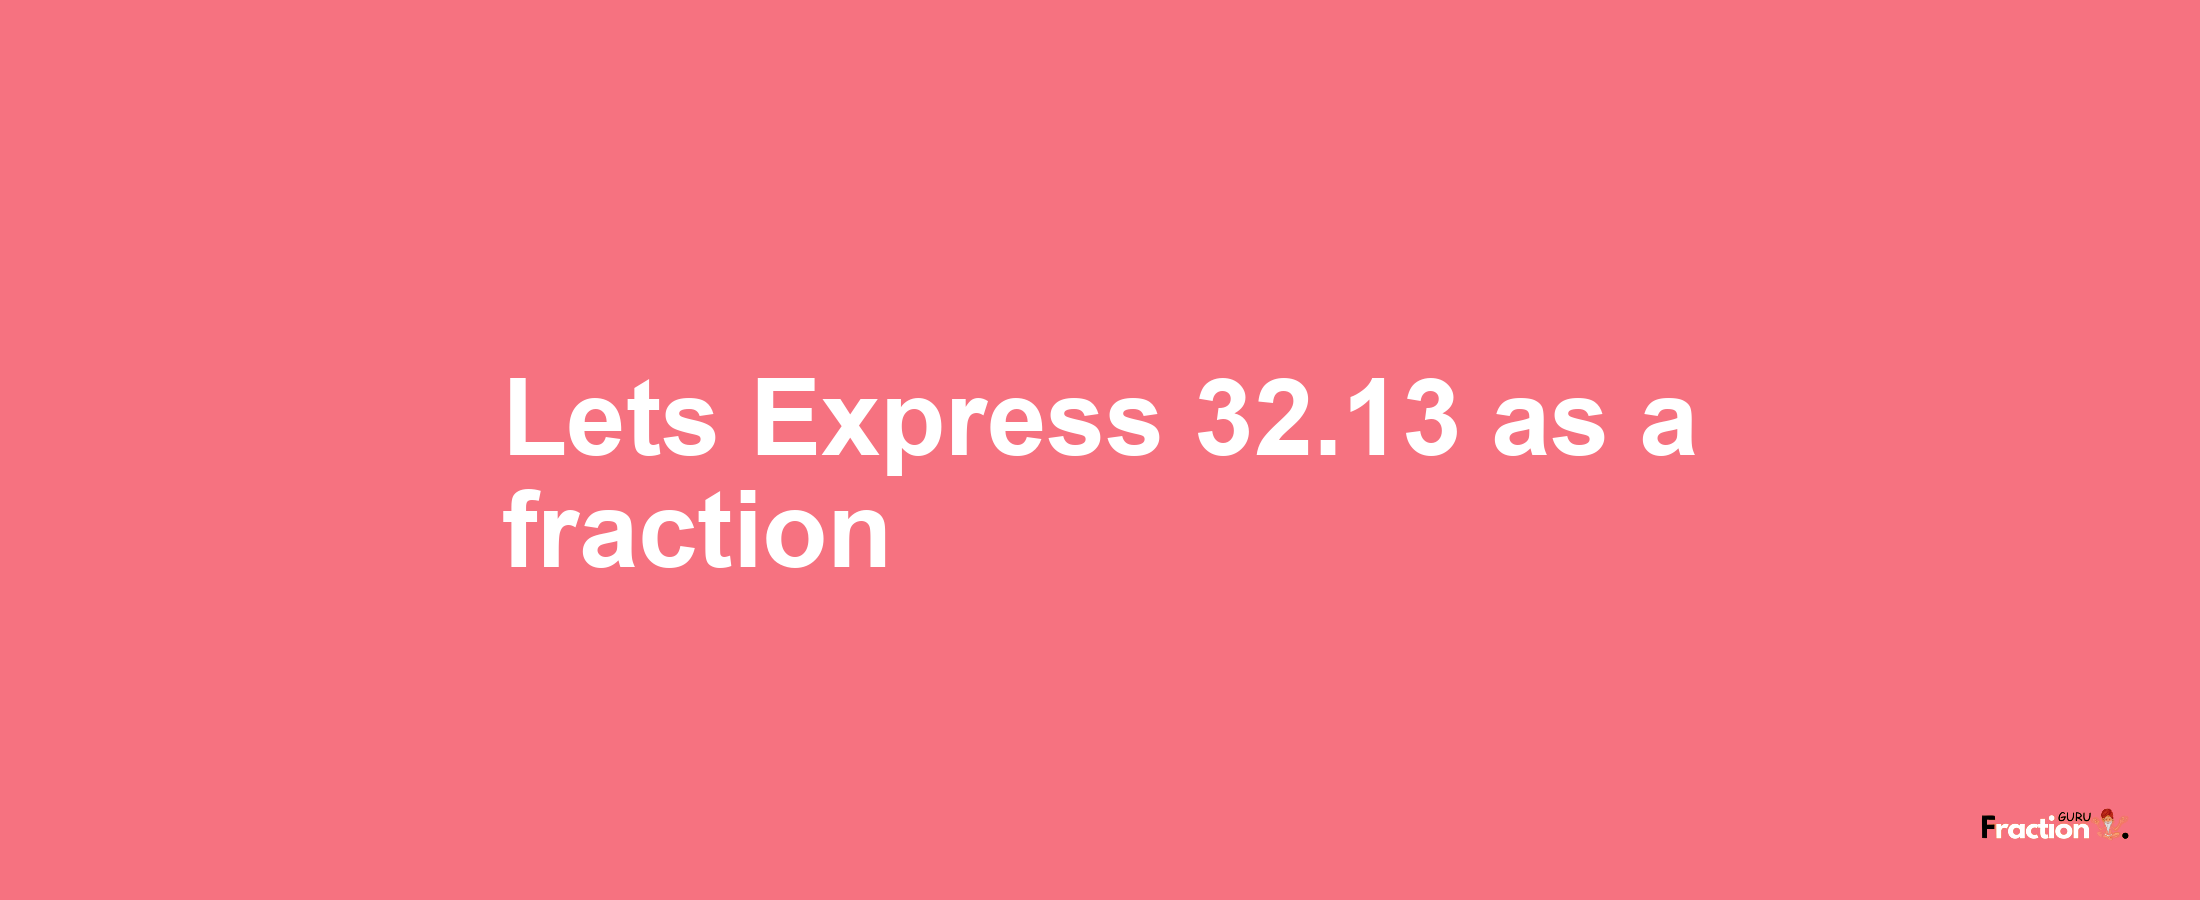 Lets Express 32.13 as afraction